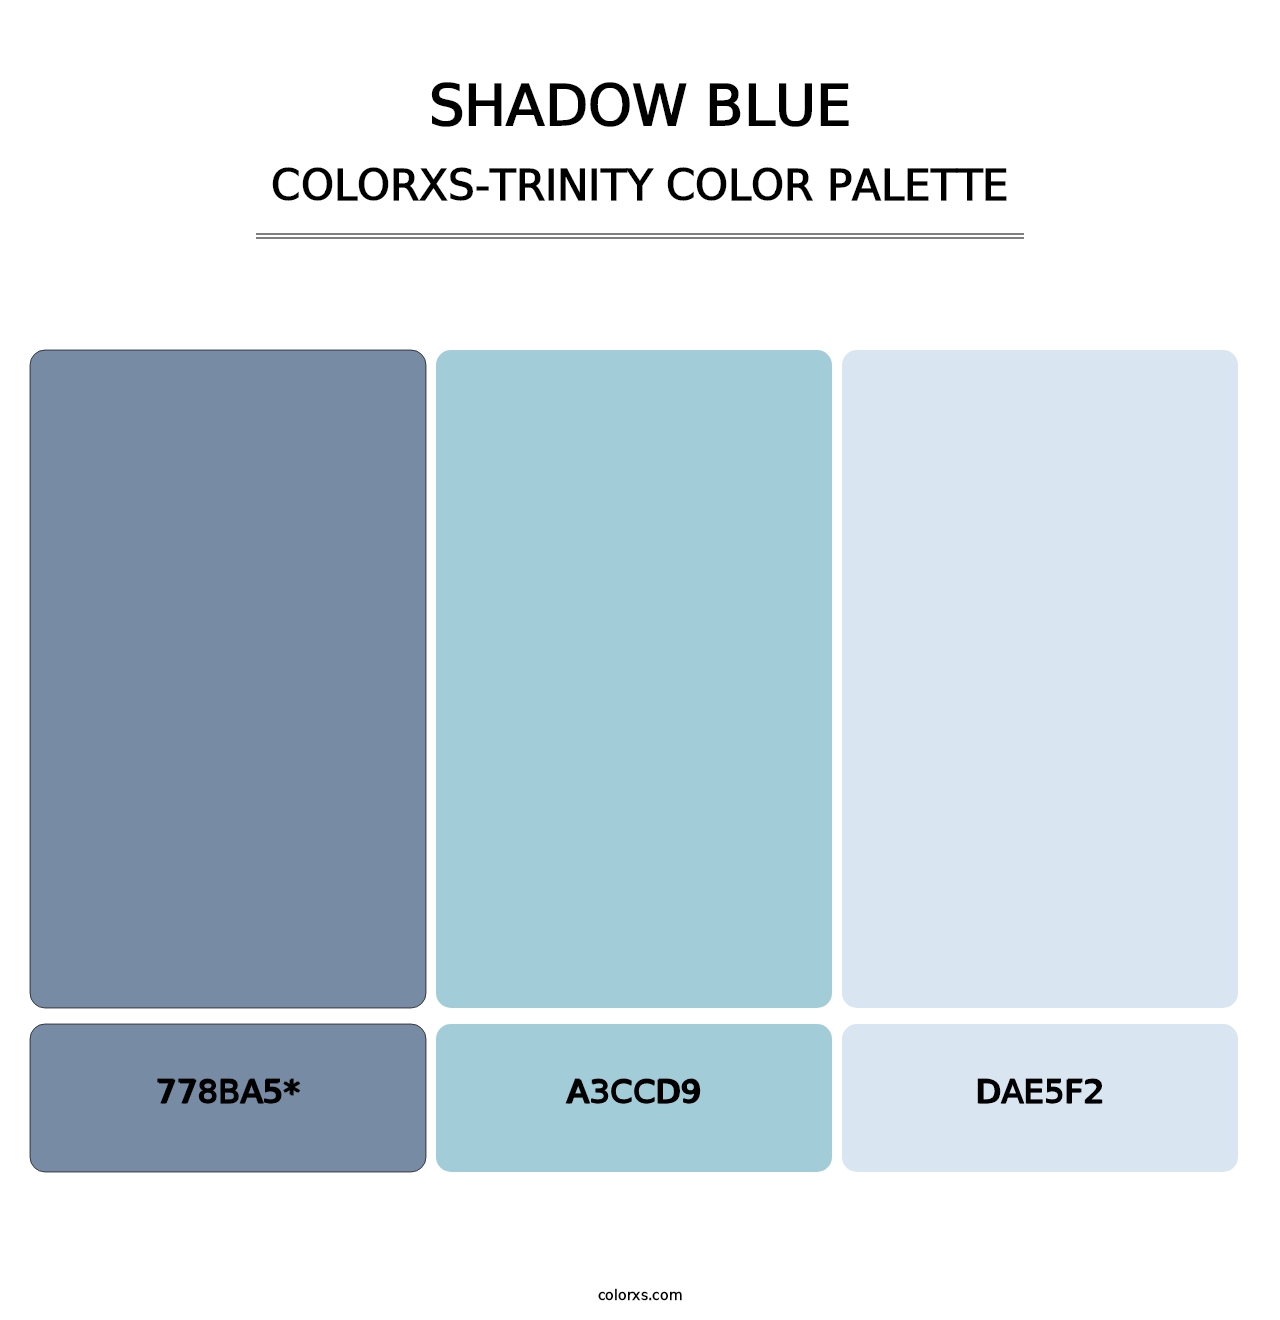 Shadow Blue - Colorxs Trinity Palette